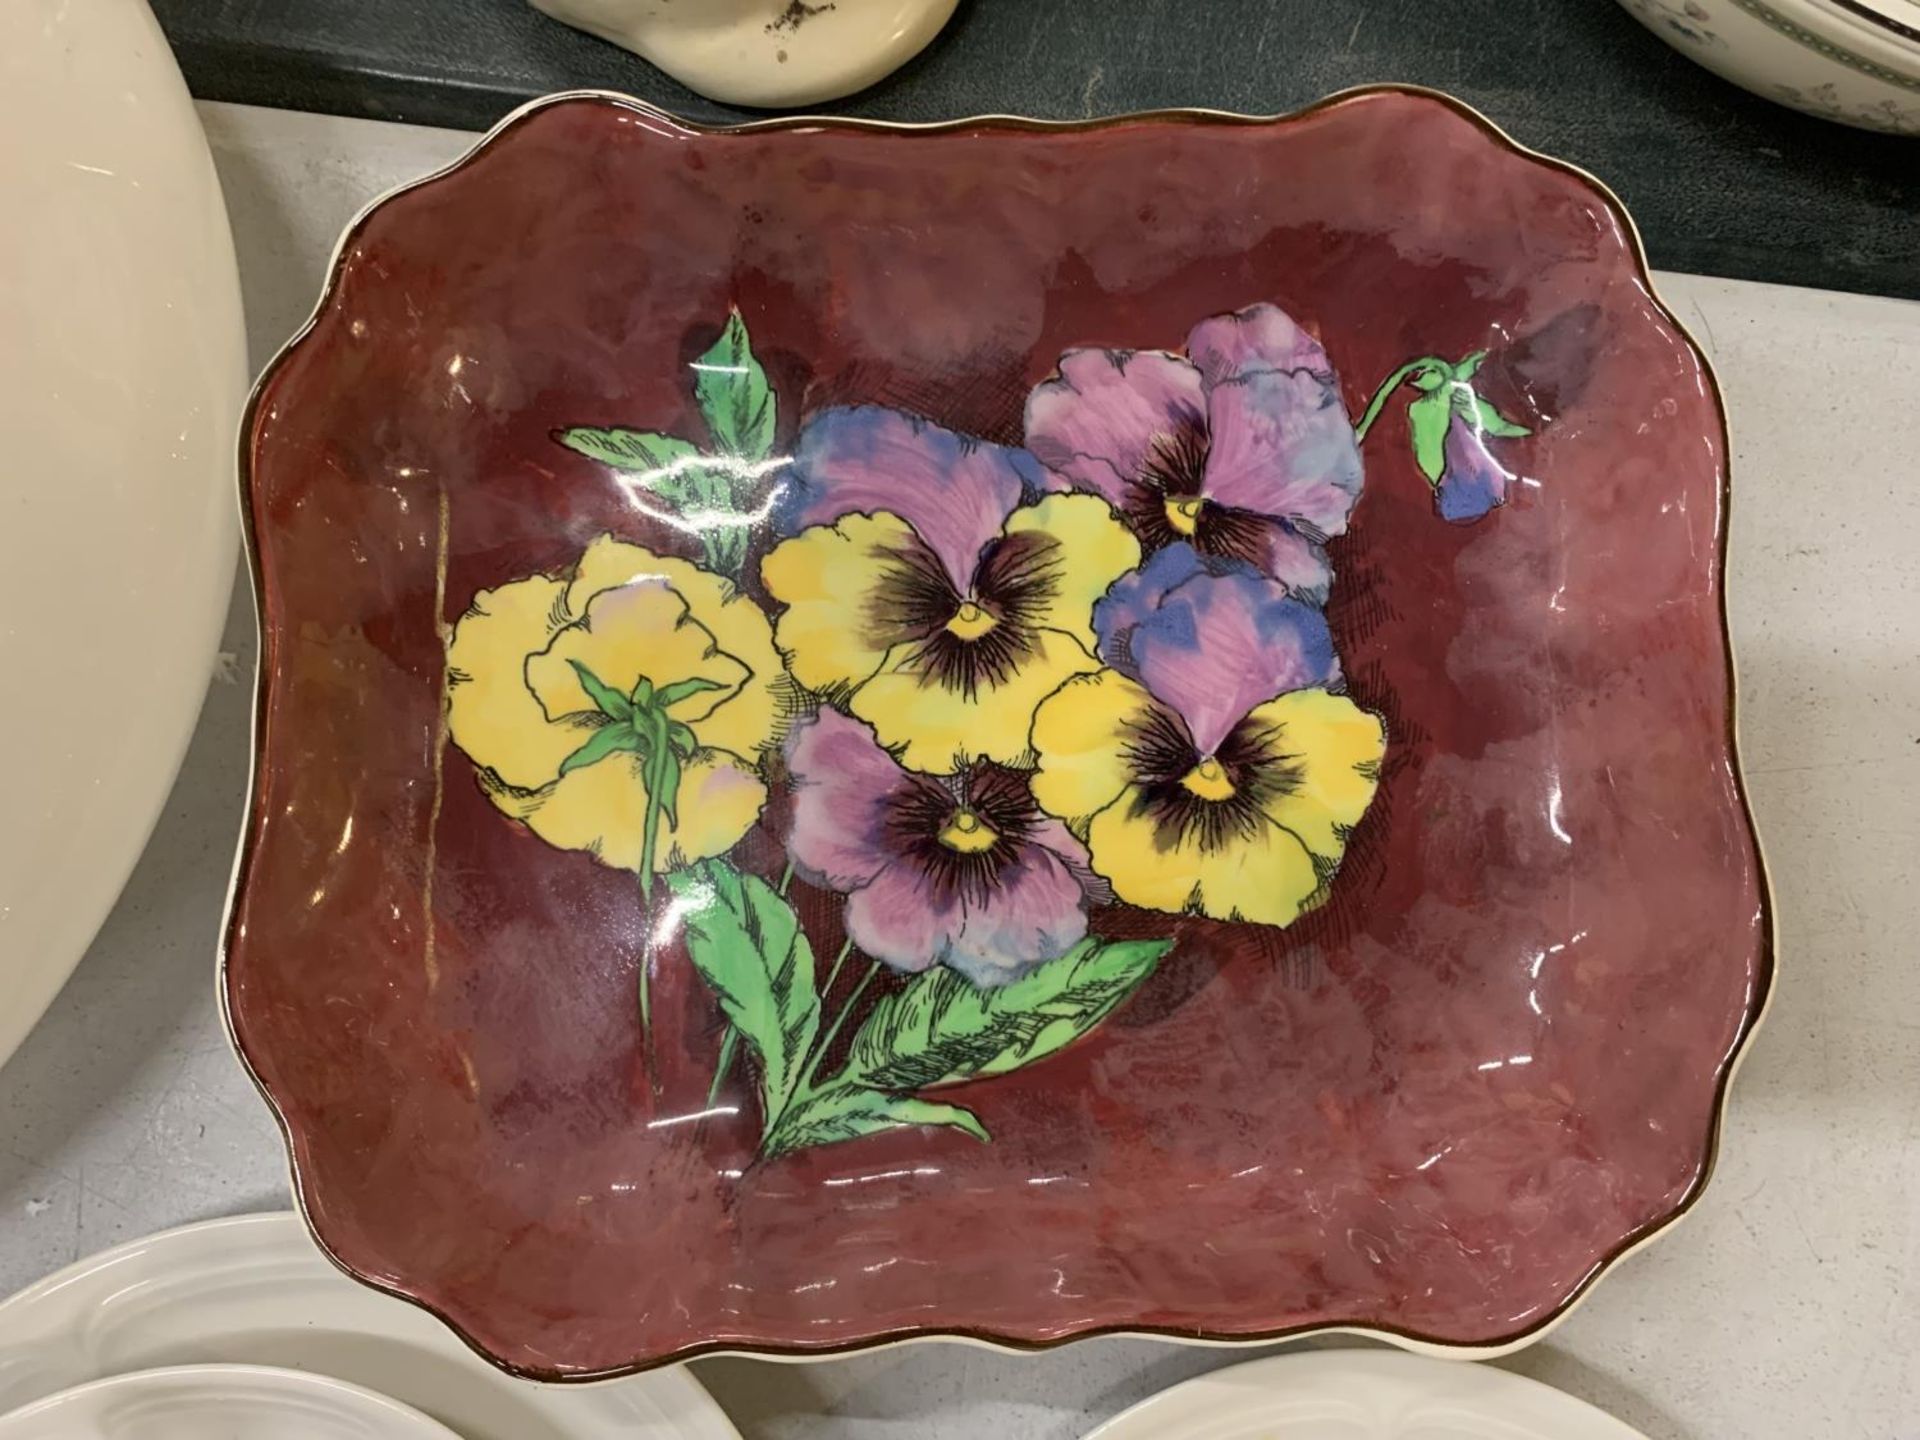 A KAHLA SET OF CUPS, SAUCERS AND SIDE PLATES WITH A ROYAL DOULTON "PANSY" BOWL - Image 2 of 5